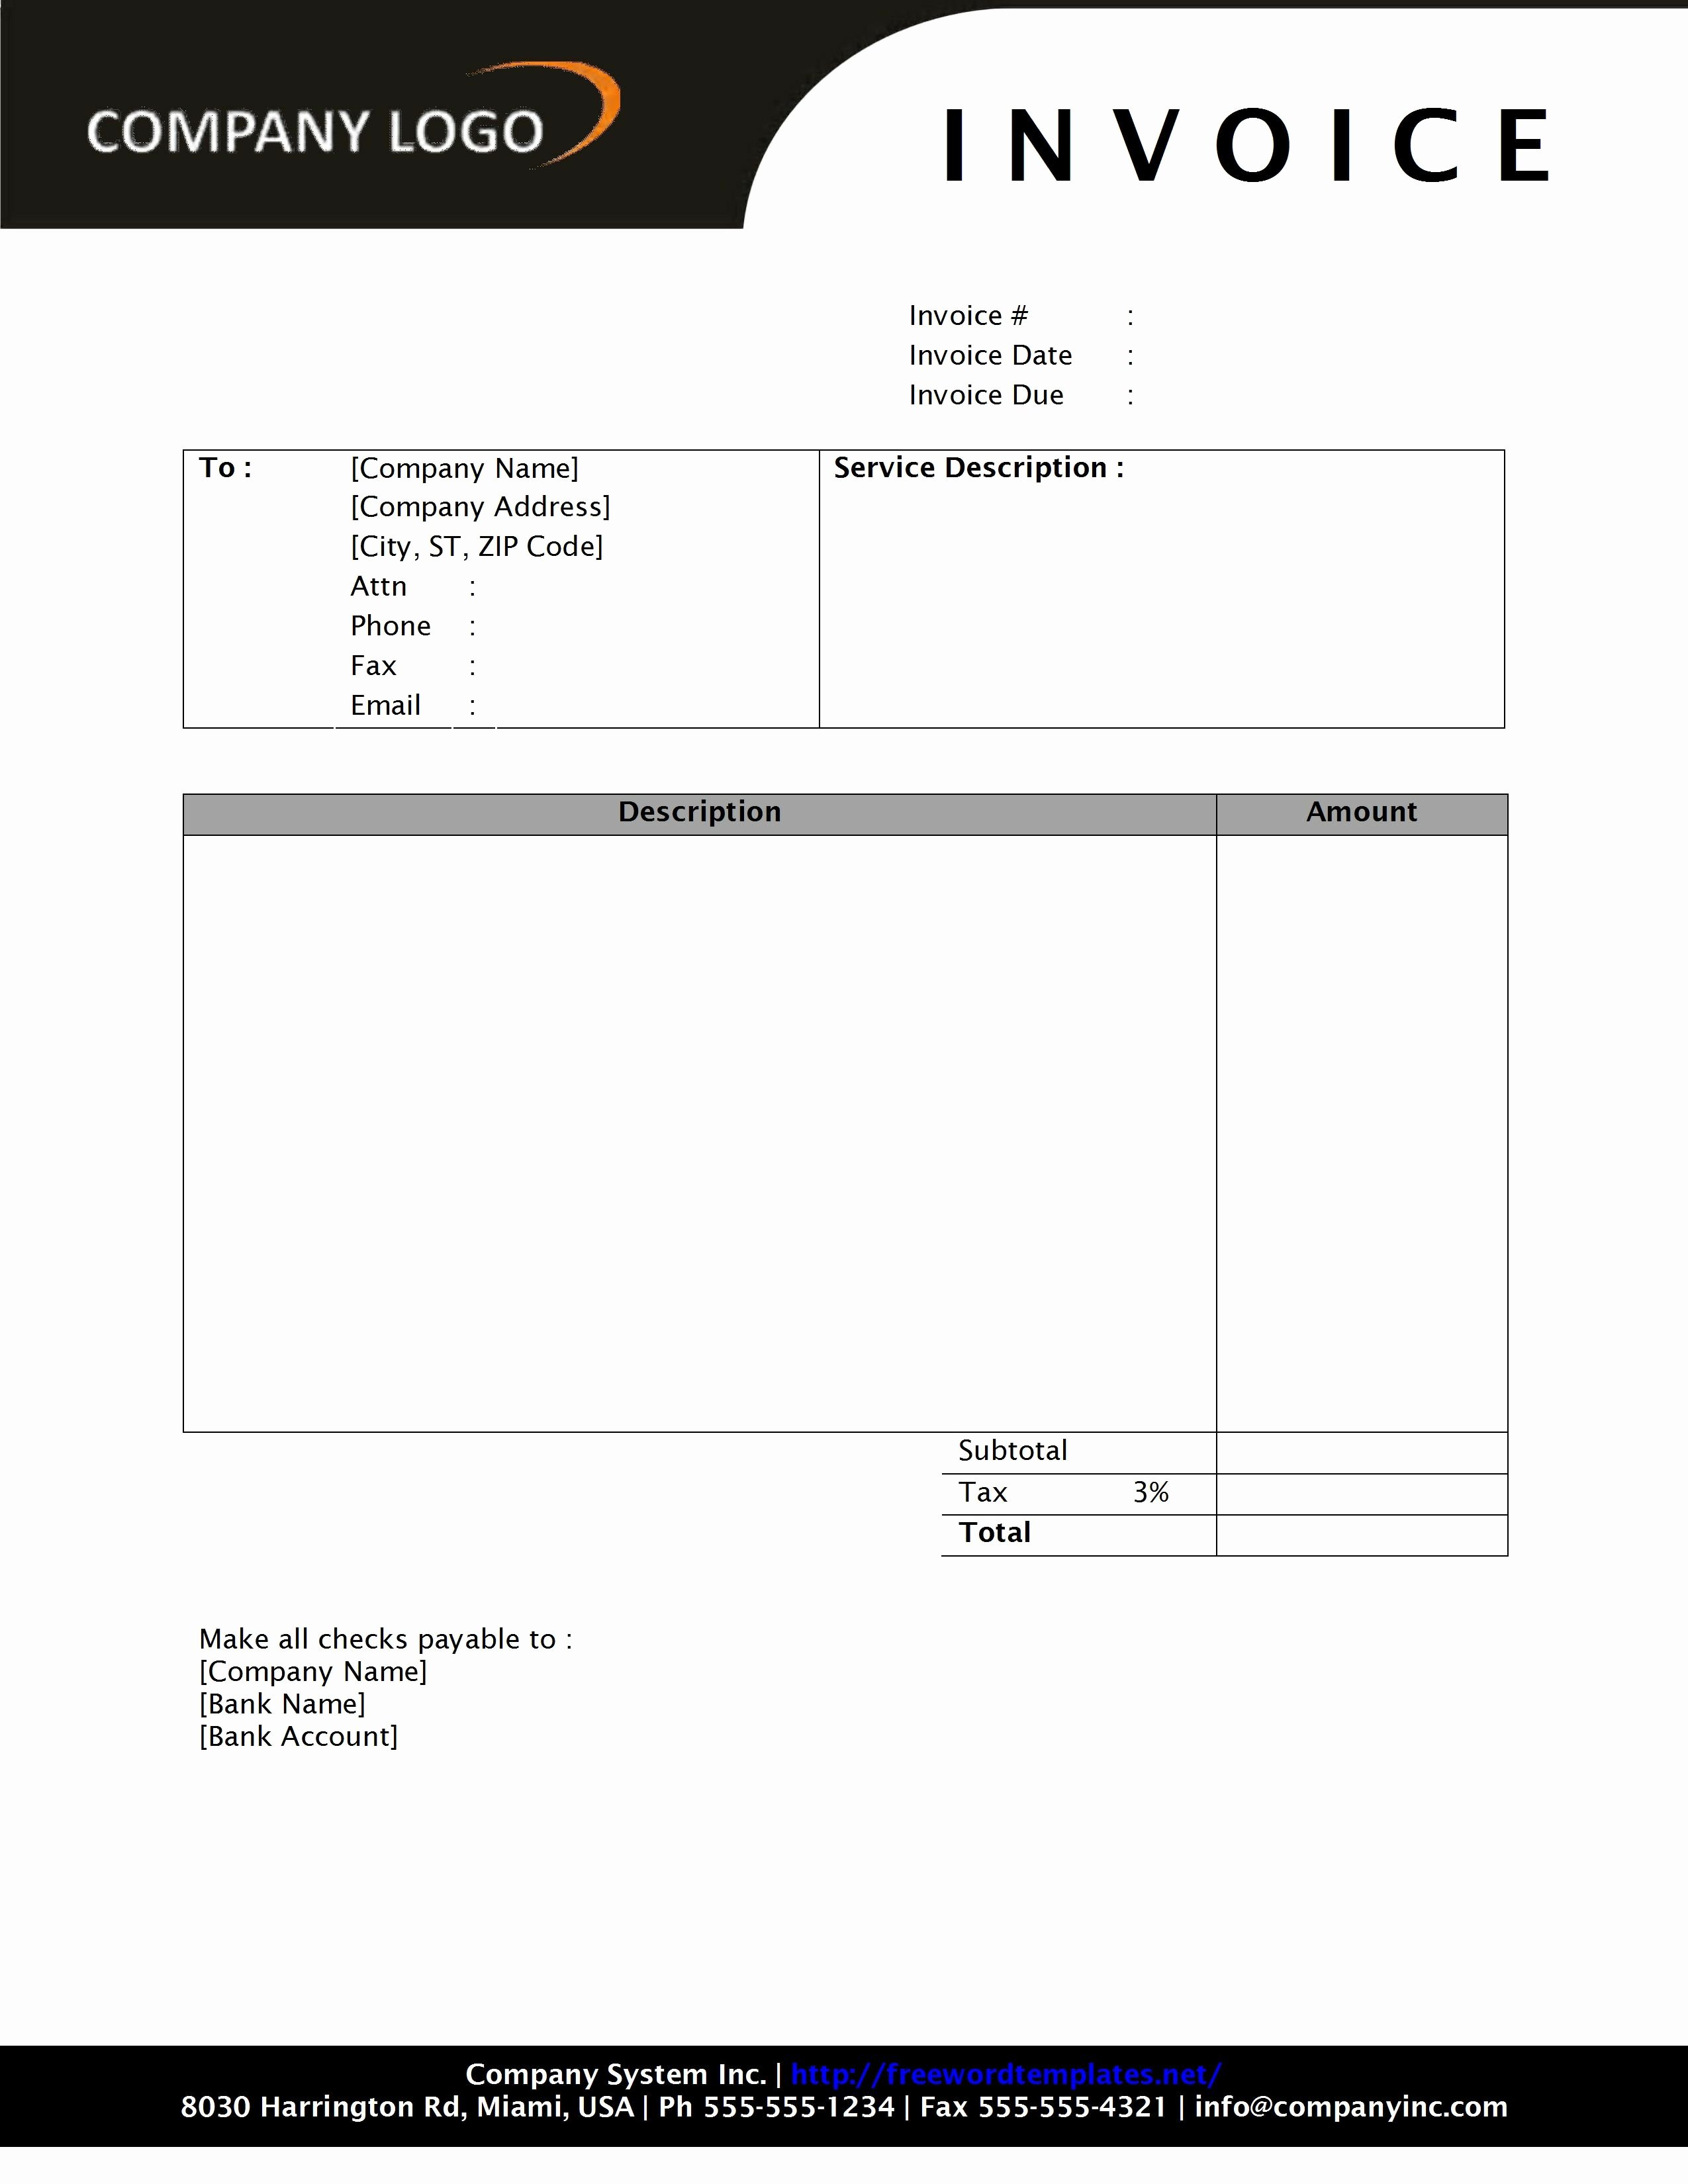 Free Downloadable Invoice Template Fresh Invoice Template Word 2010